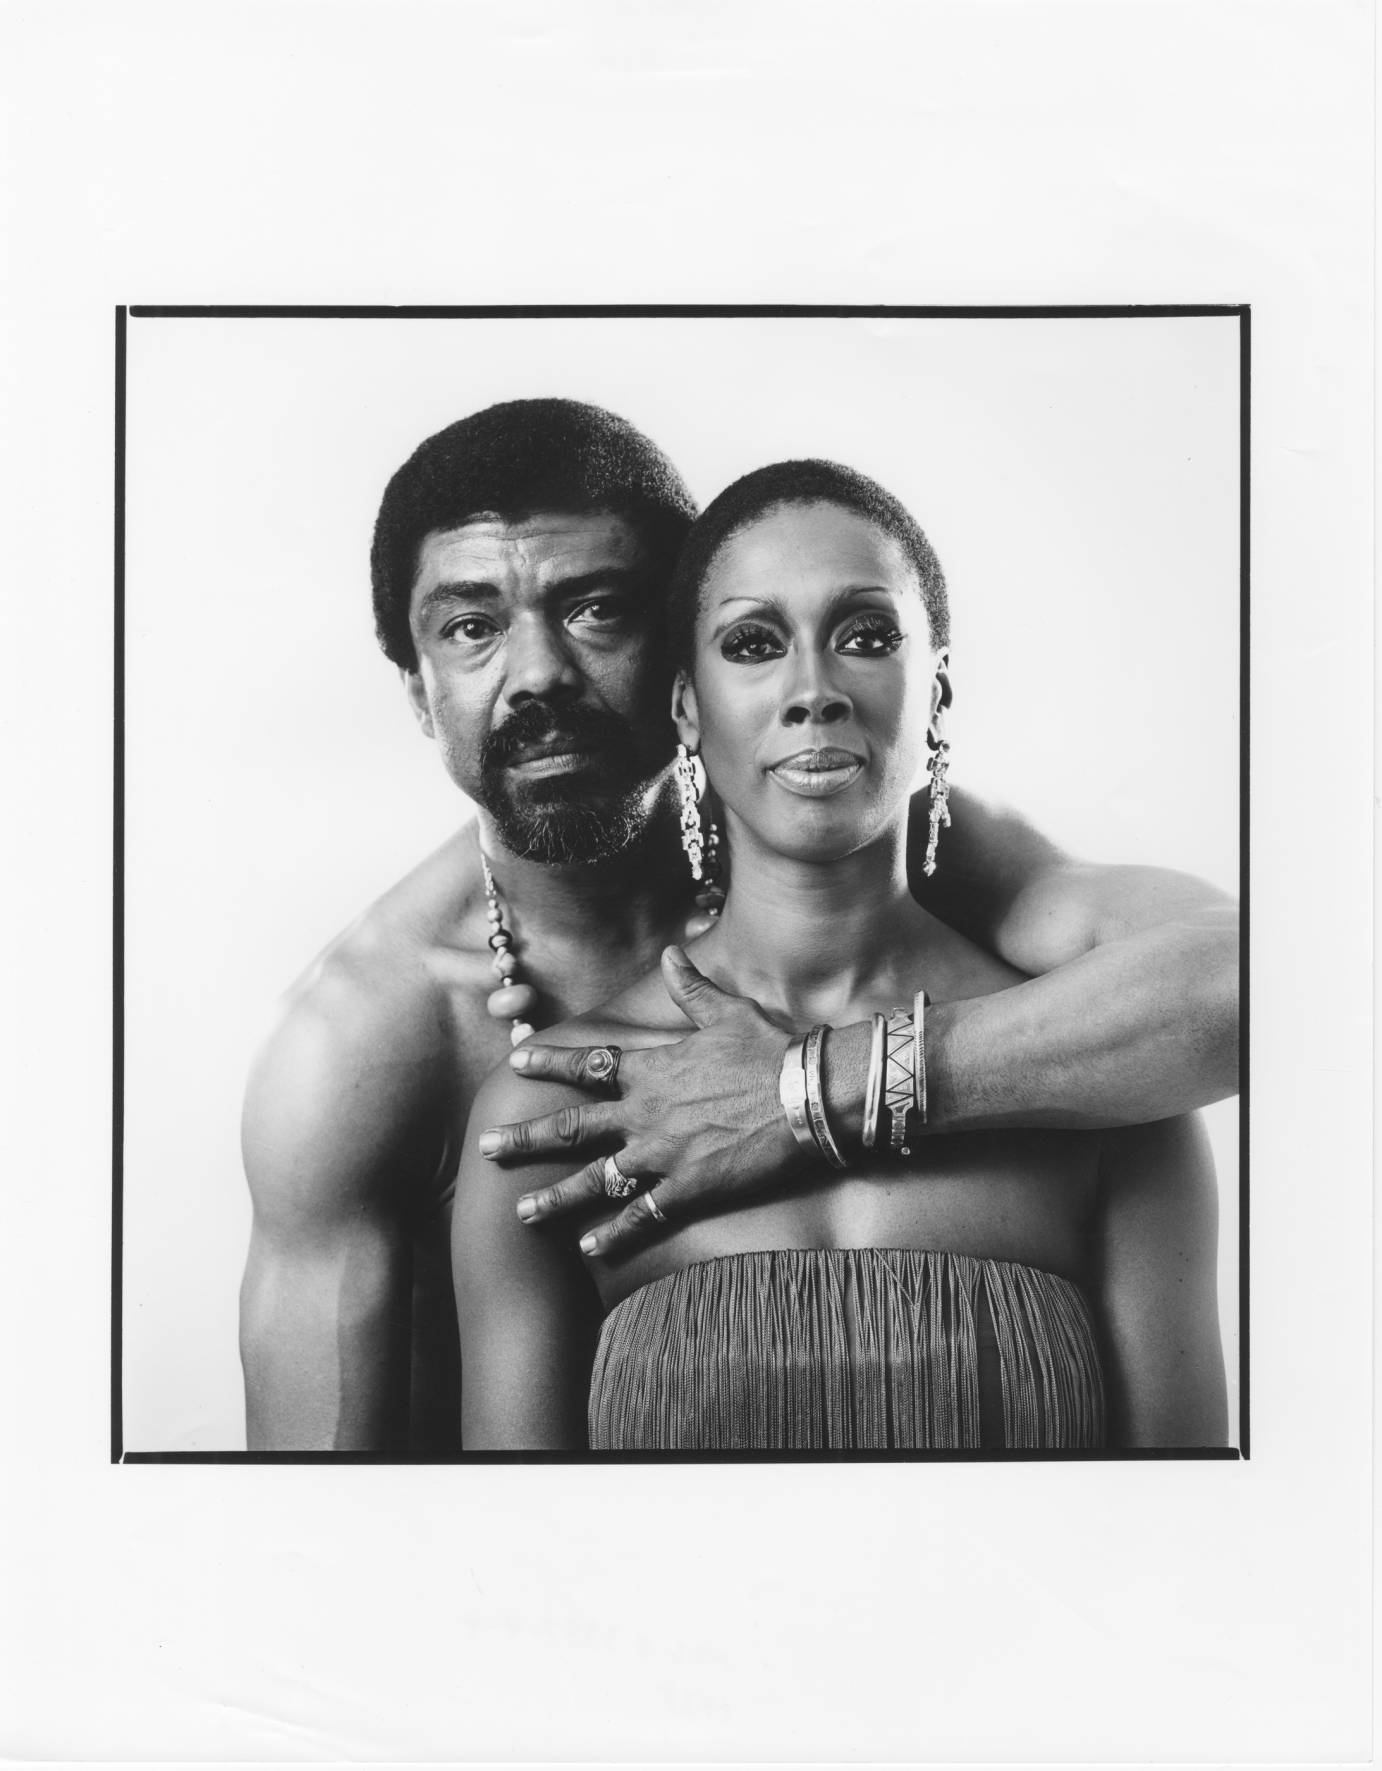 A bare-chested Alvin Ailey stands behind Judith Jamison with one arm around her